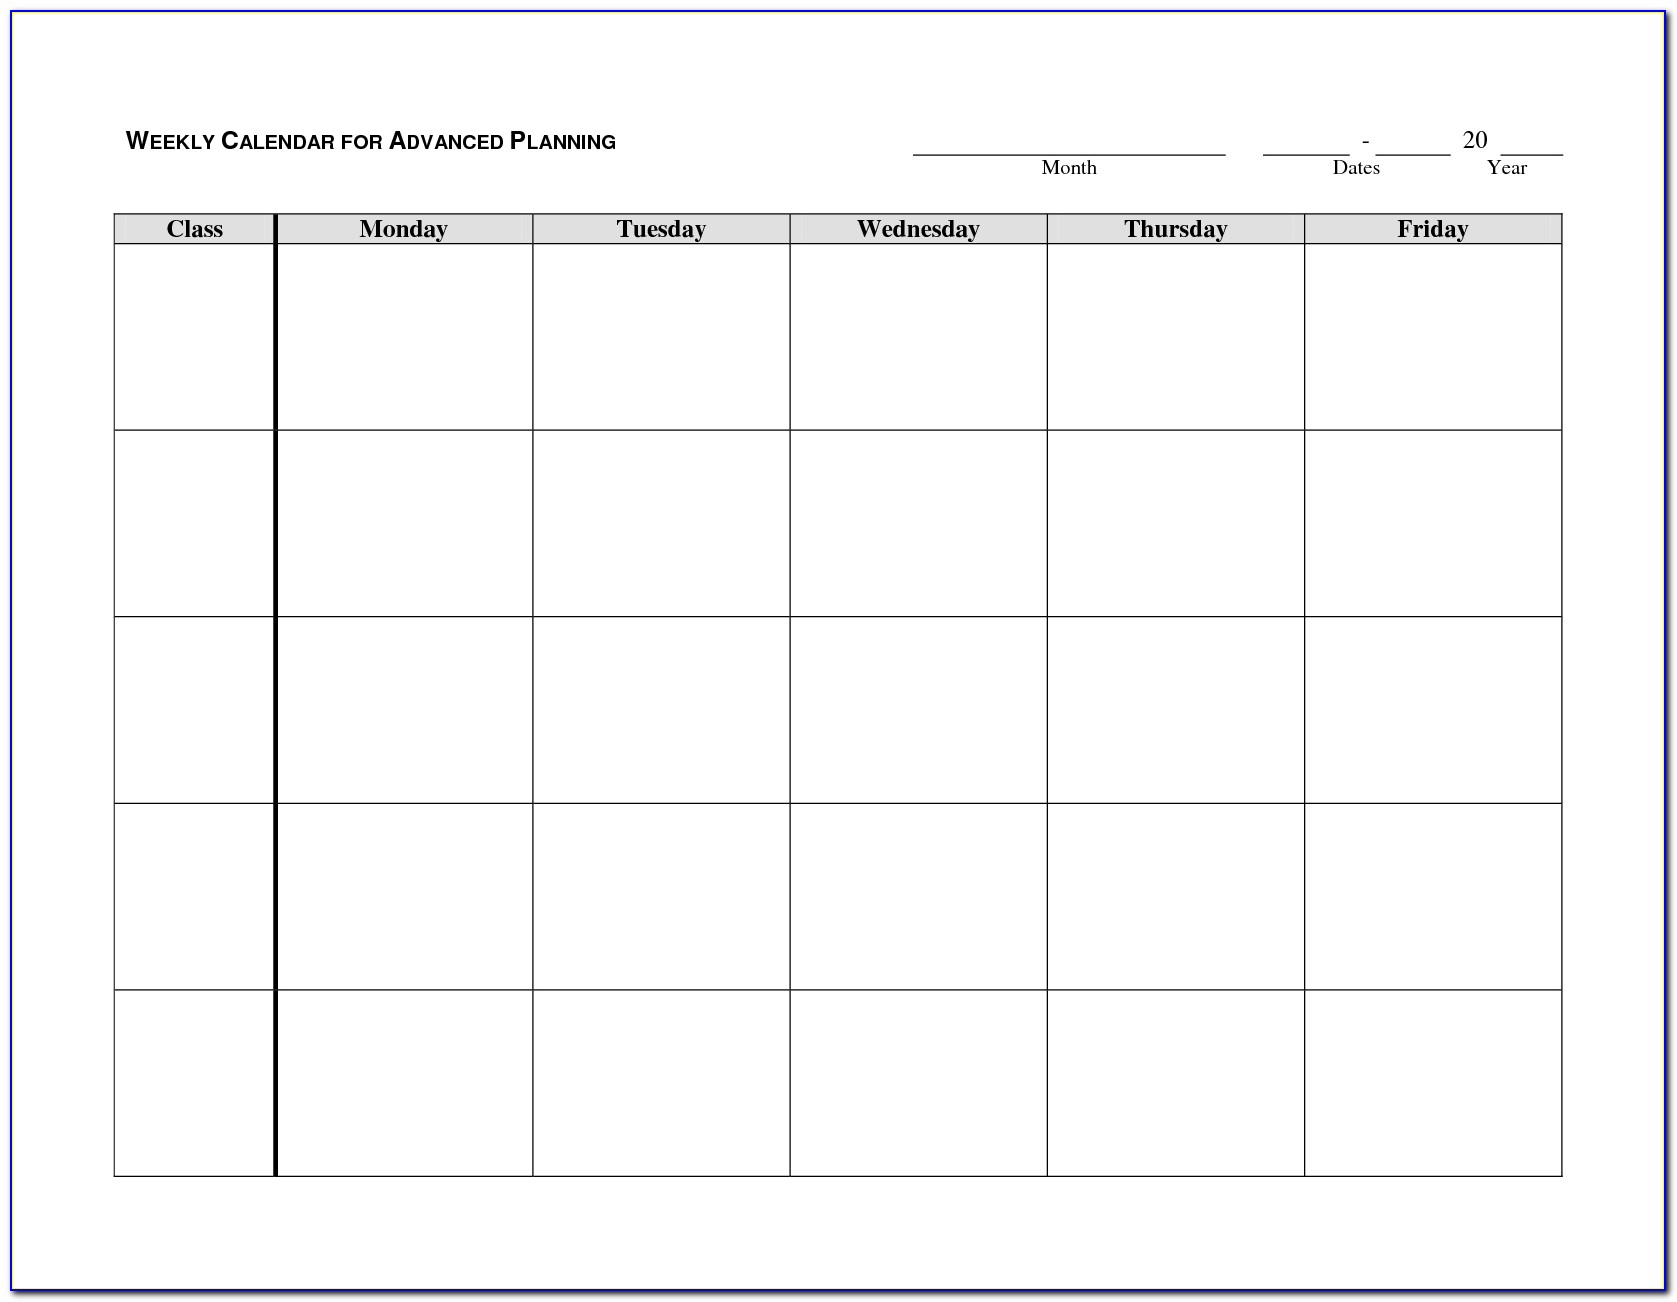 Monday Through Friday Schedule Template